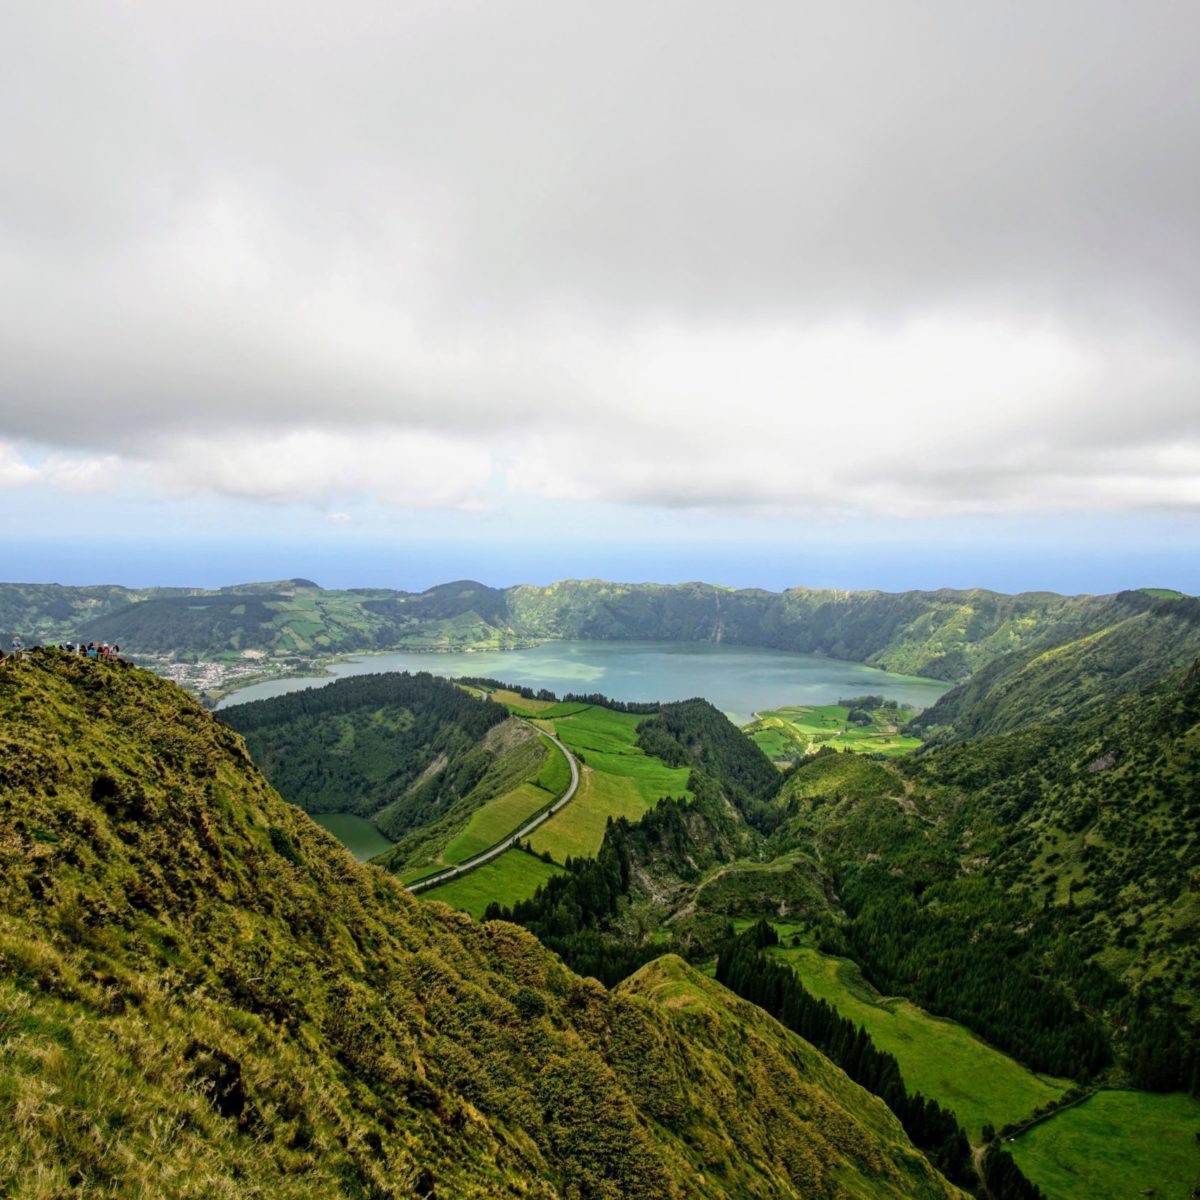 Sky-view of the lush green landscape in Azores Island, with a lake in the middle.